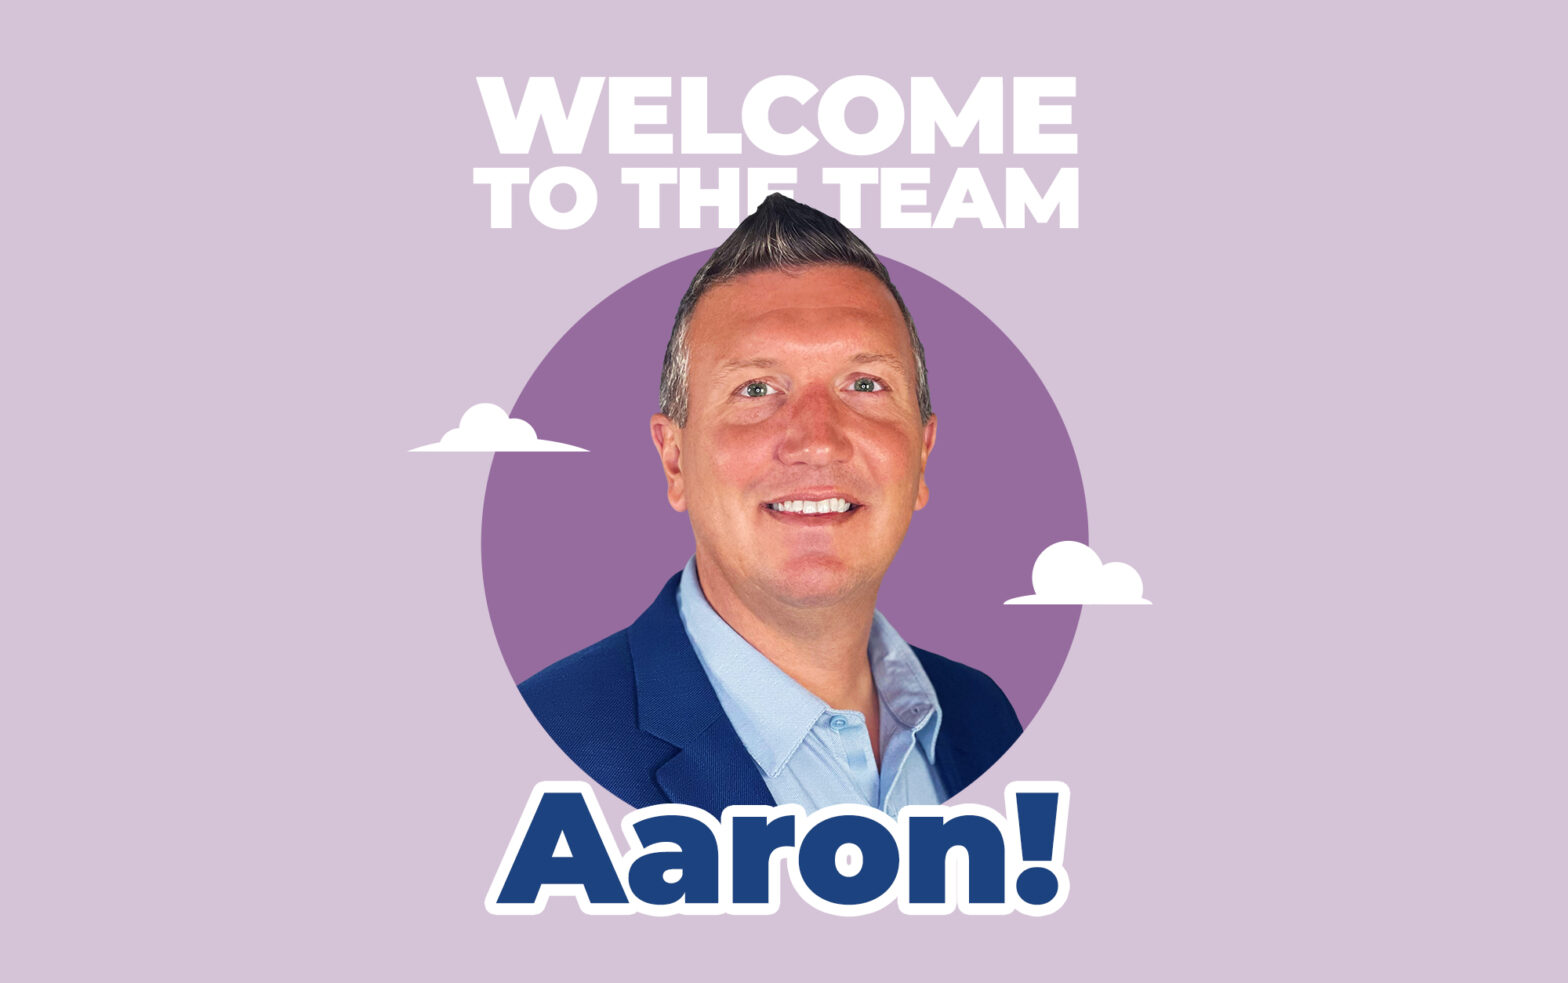 Meet our Direct Sales Account Executive, Aaron